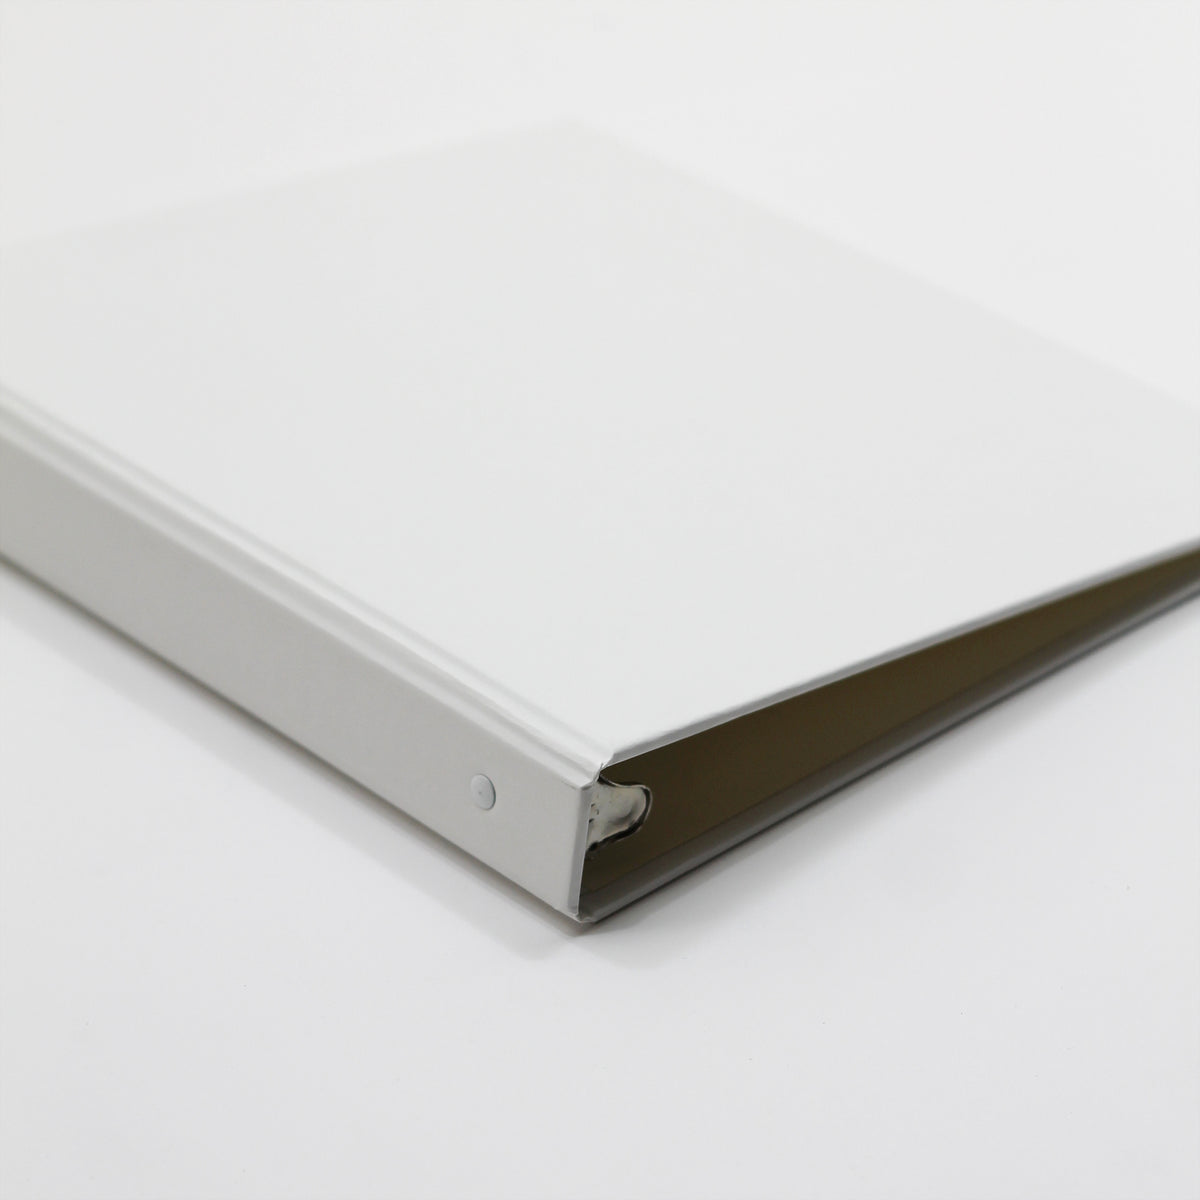 Christmas Card Album with White Vegan Leather Cover